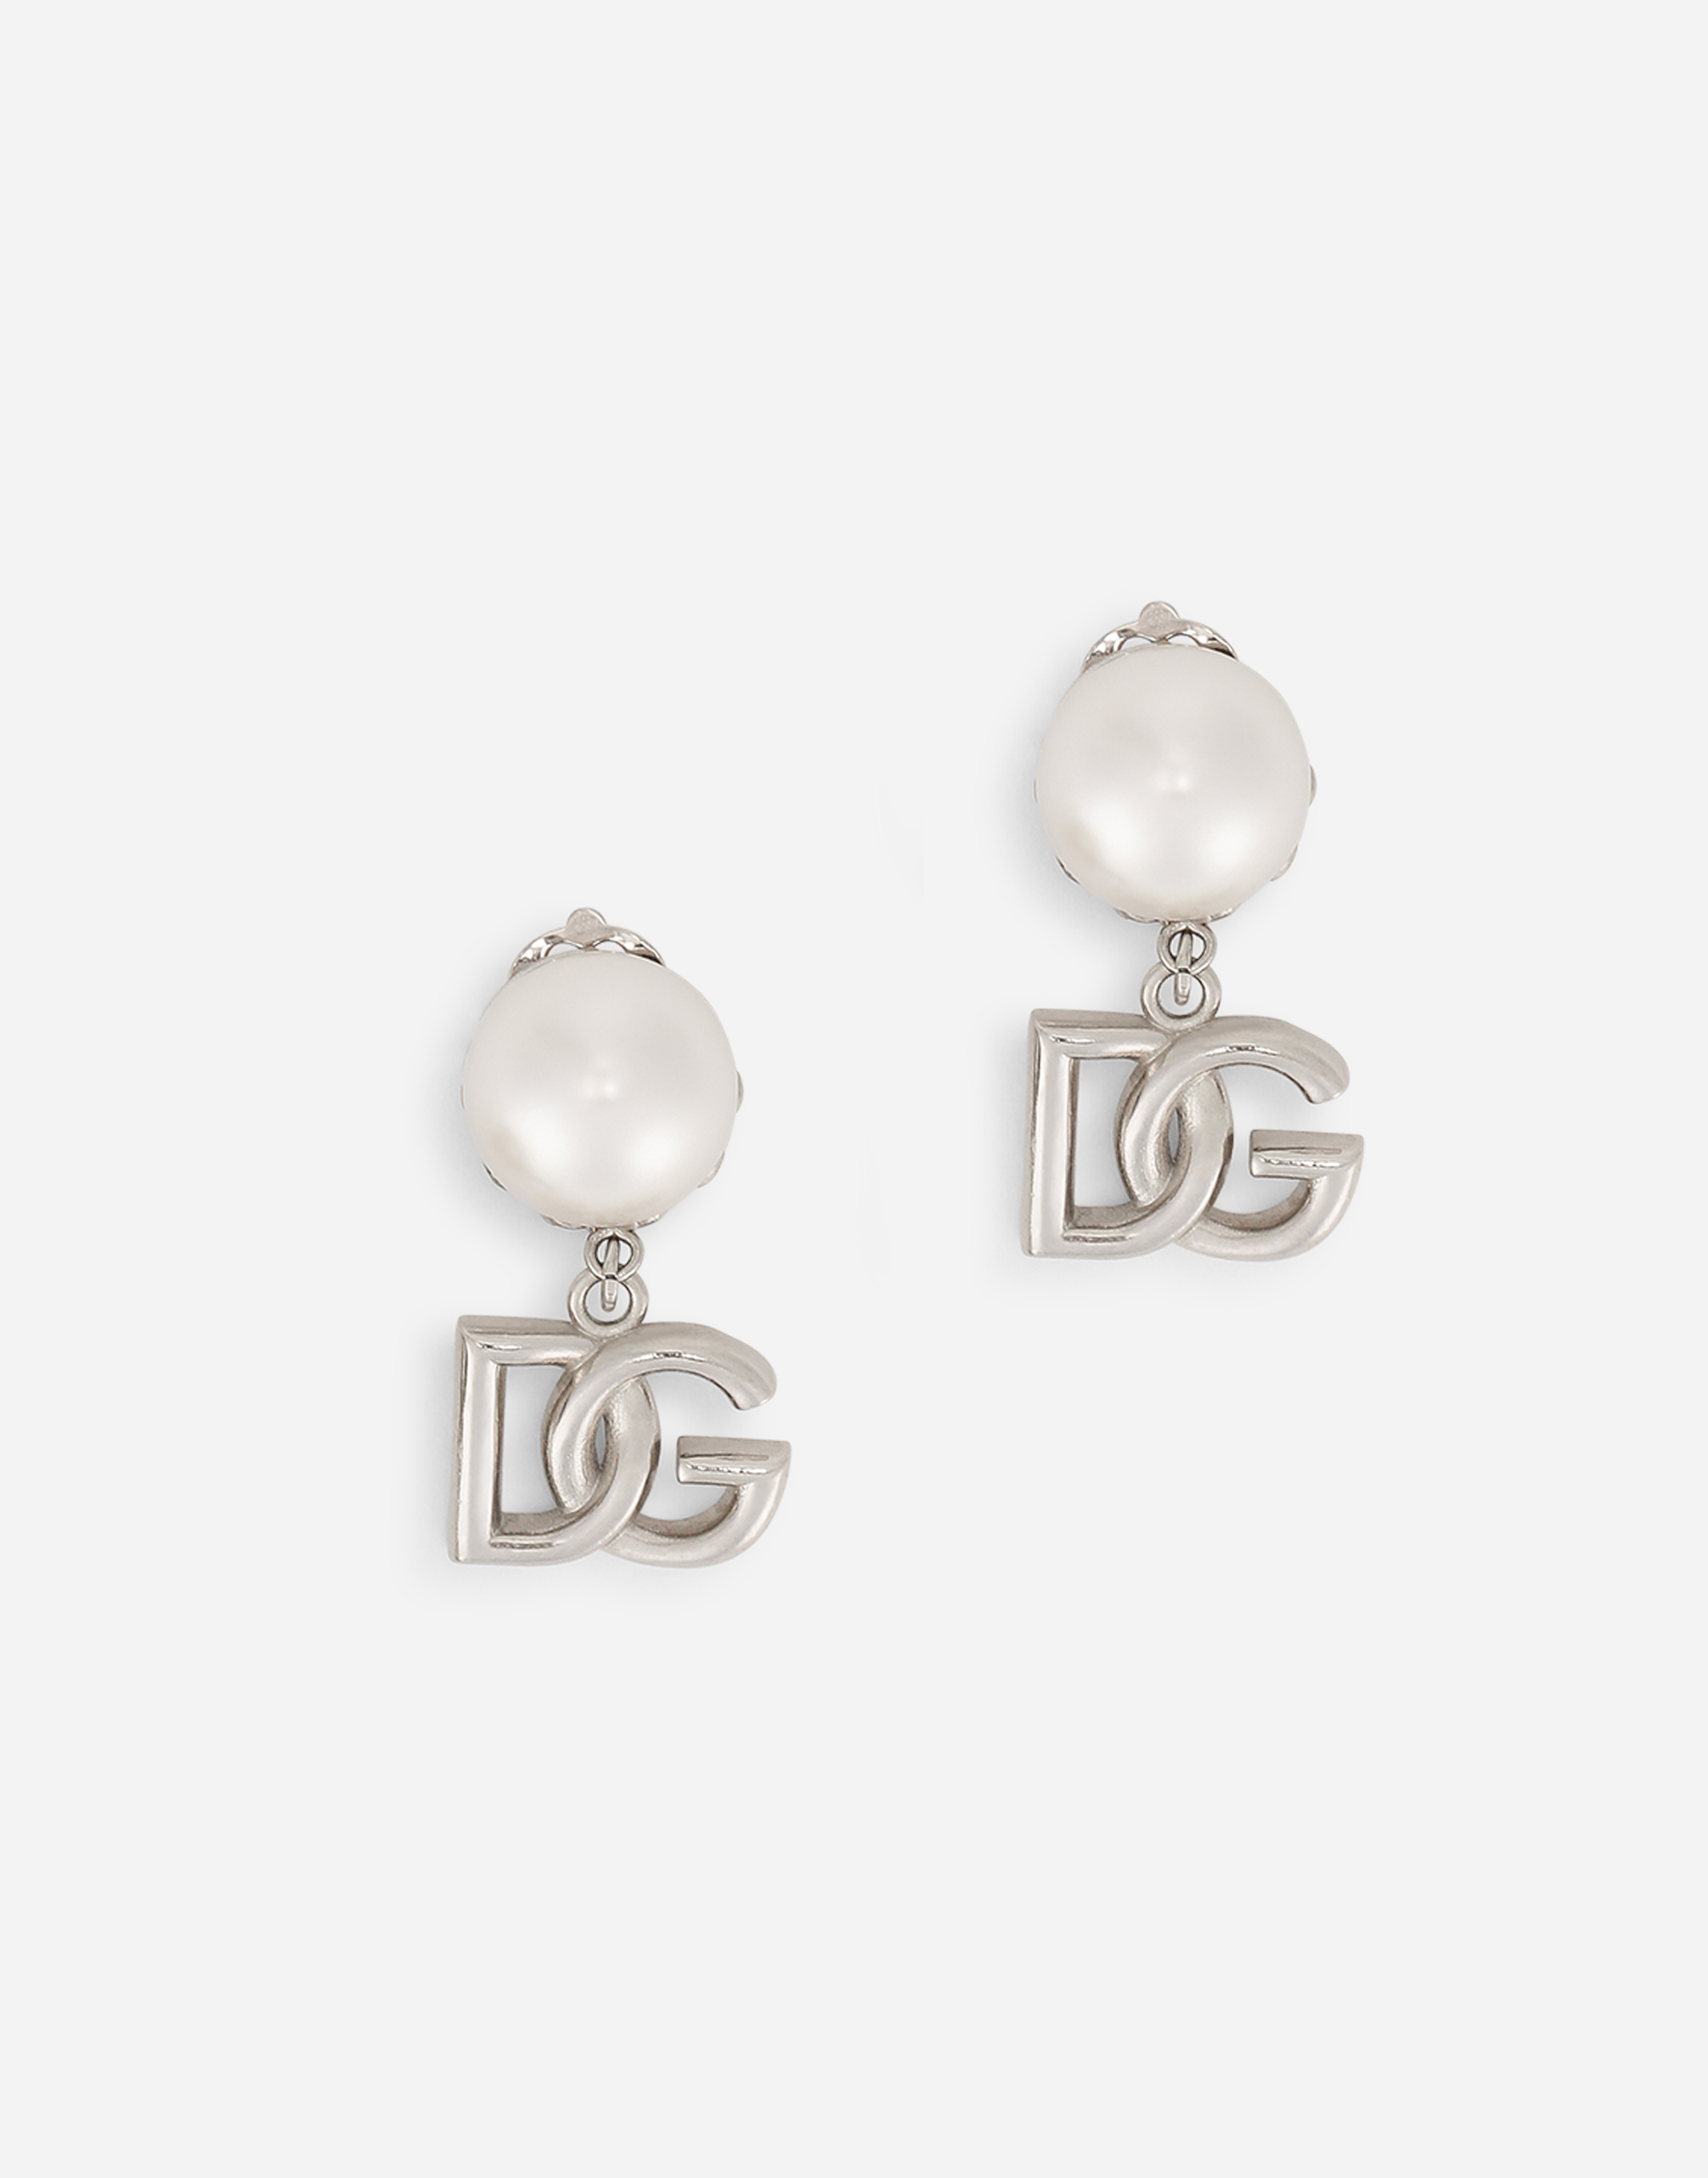 Drop earrings with pearls and DG logo in Silver